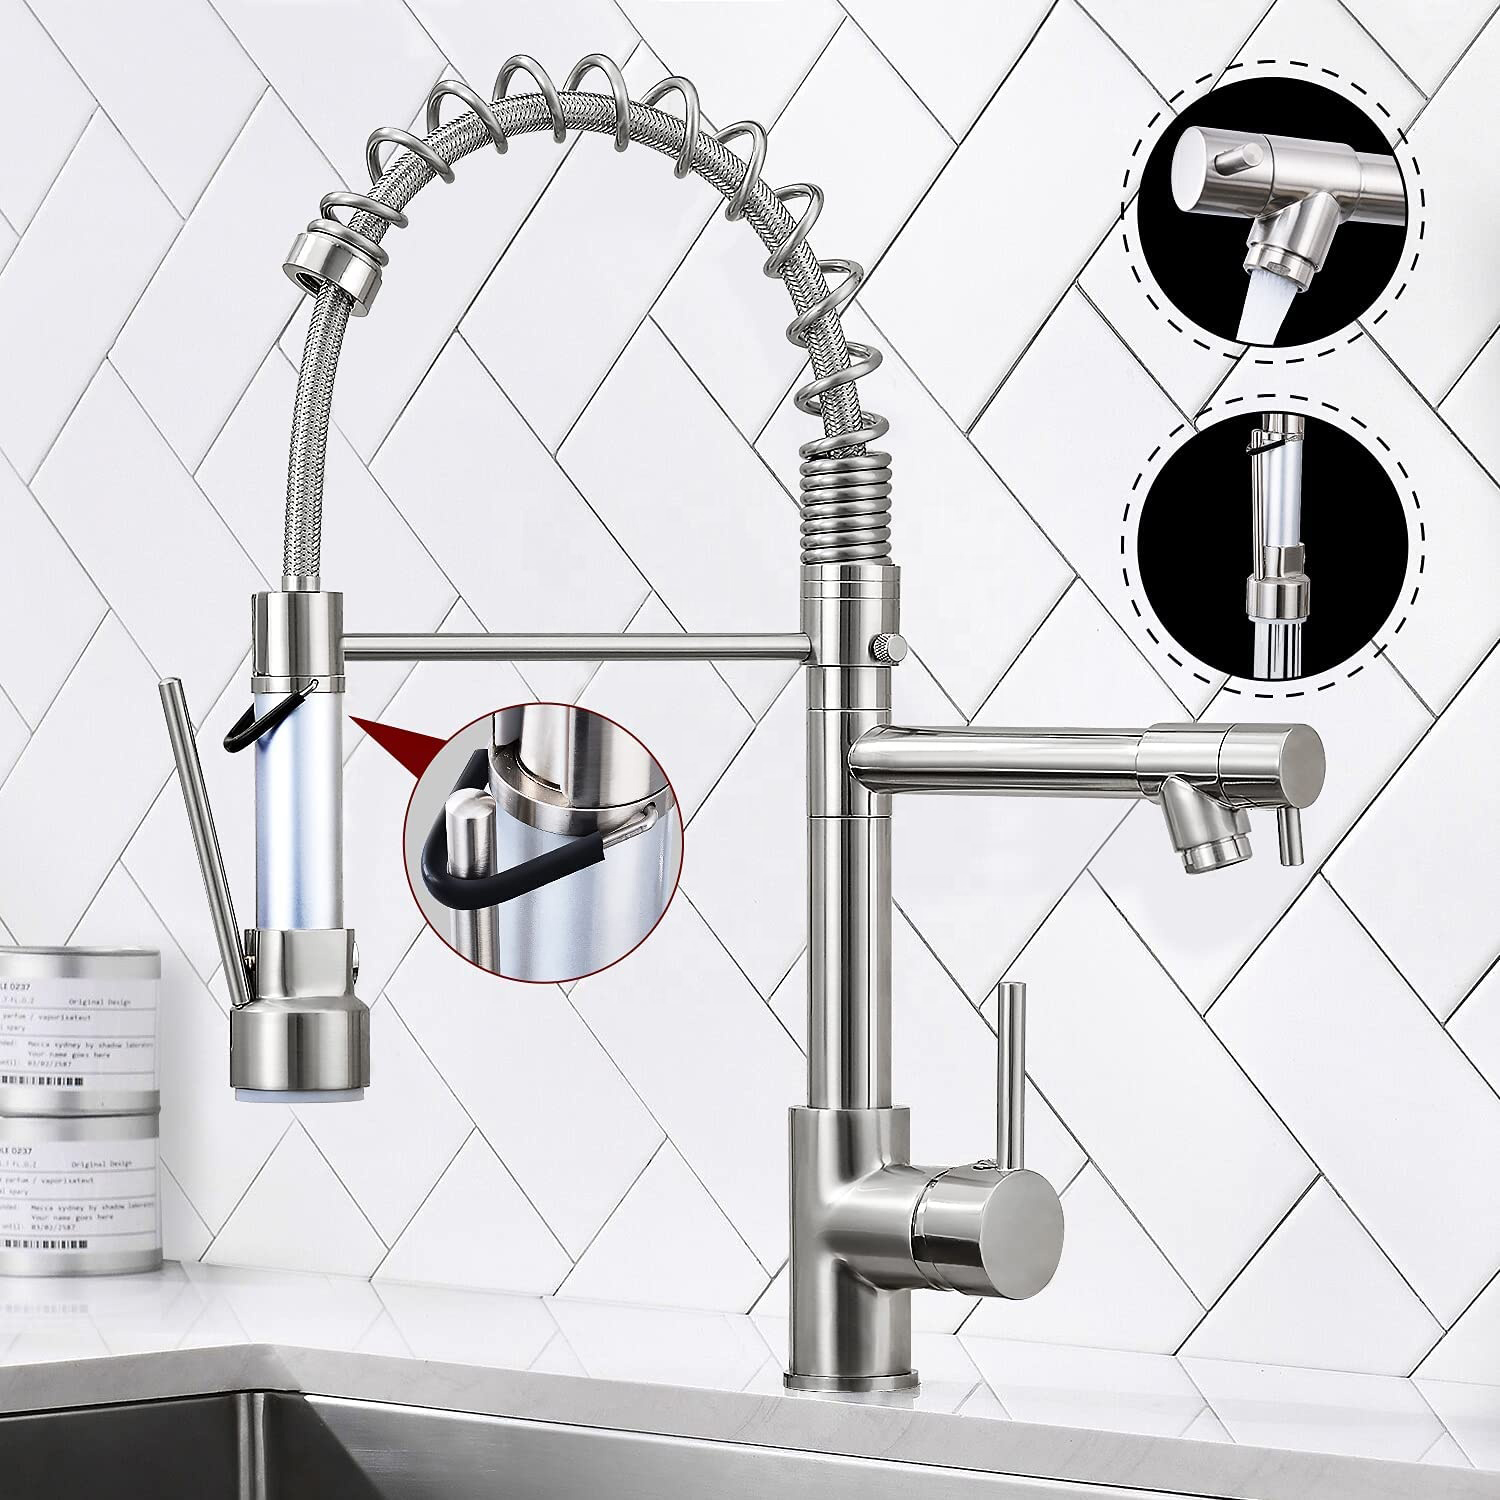 Aquacubic Top Class UPC Spring Commercial Pull Down Kitchen Faucet with Sprayer LED Light